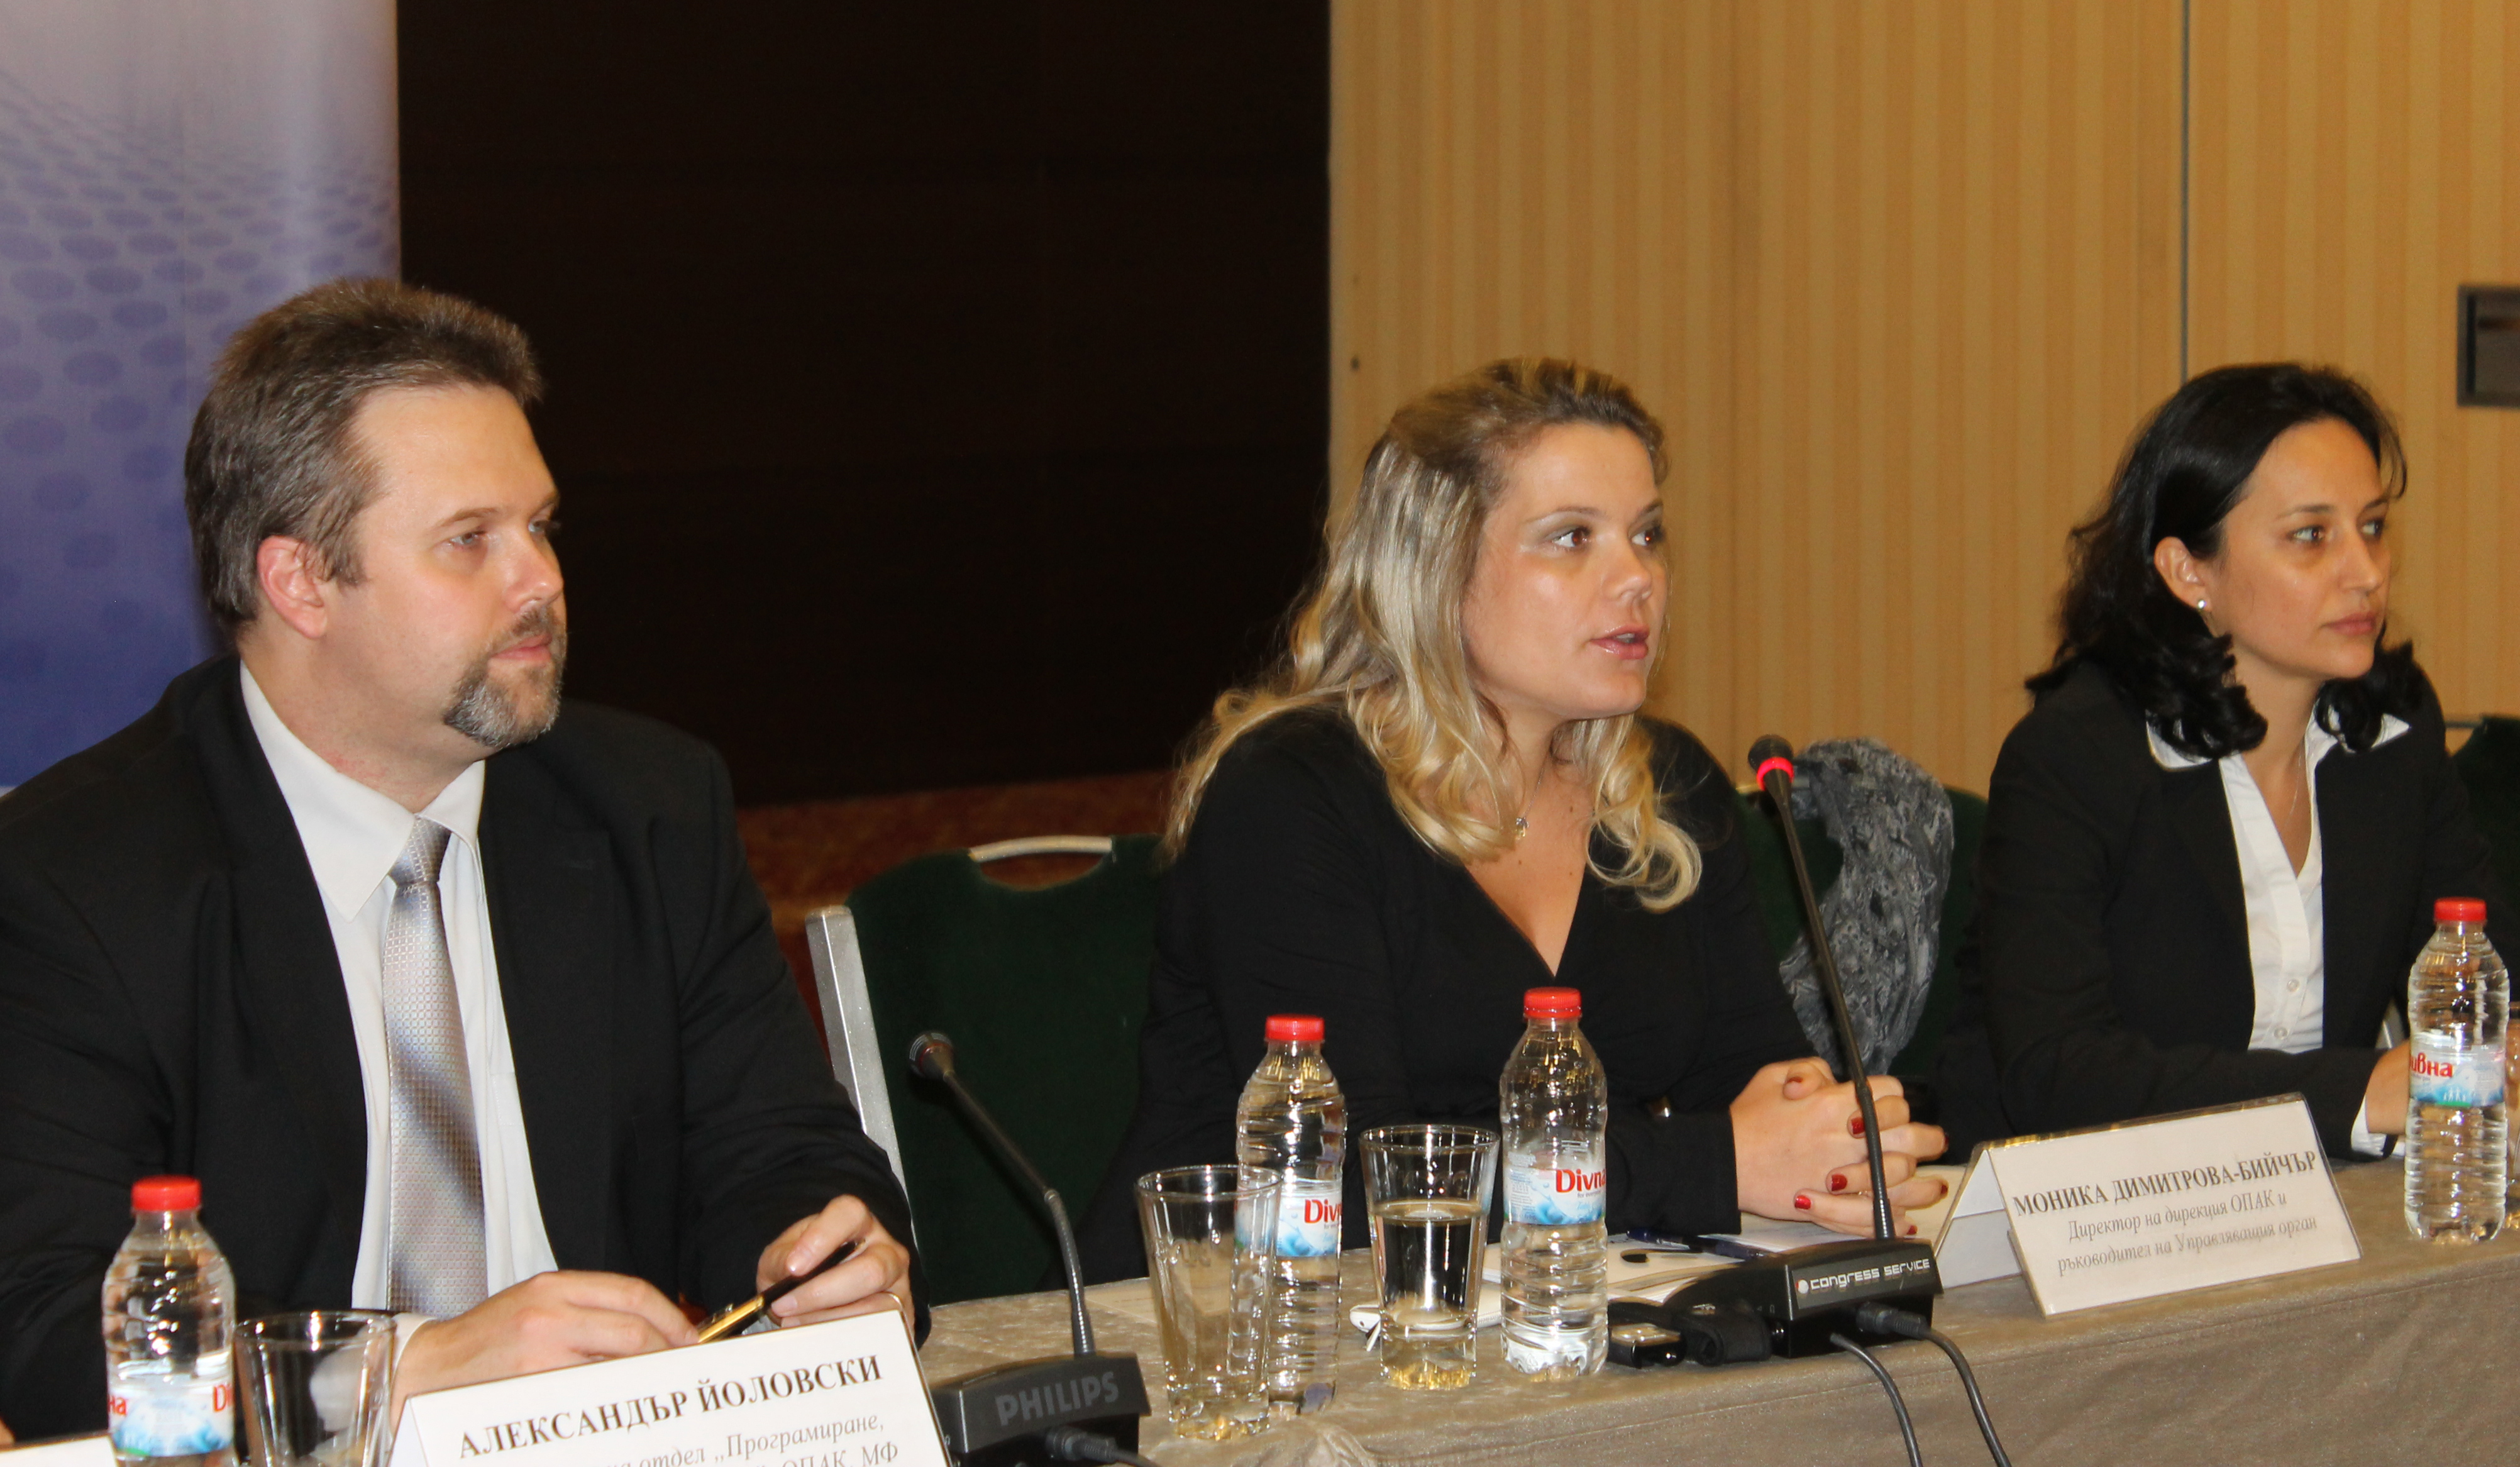 THE OPAC MONITORING COMMITTEE HAS APPROVED THREE NEW PROCEDURES FOR 2013